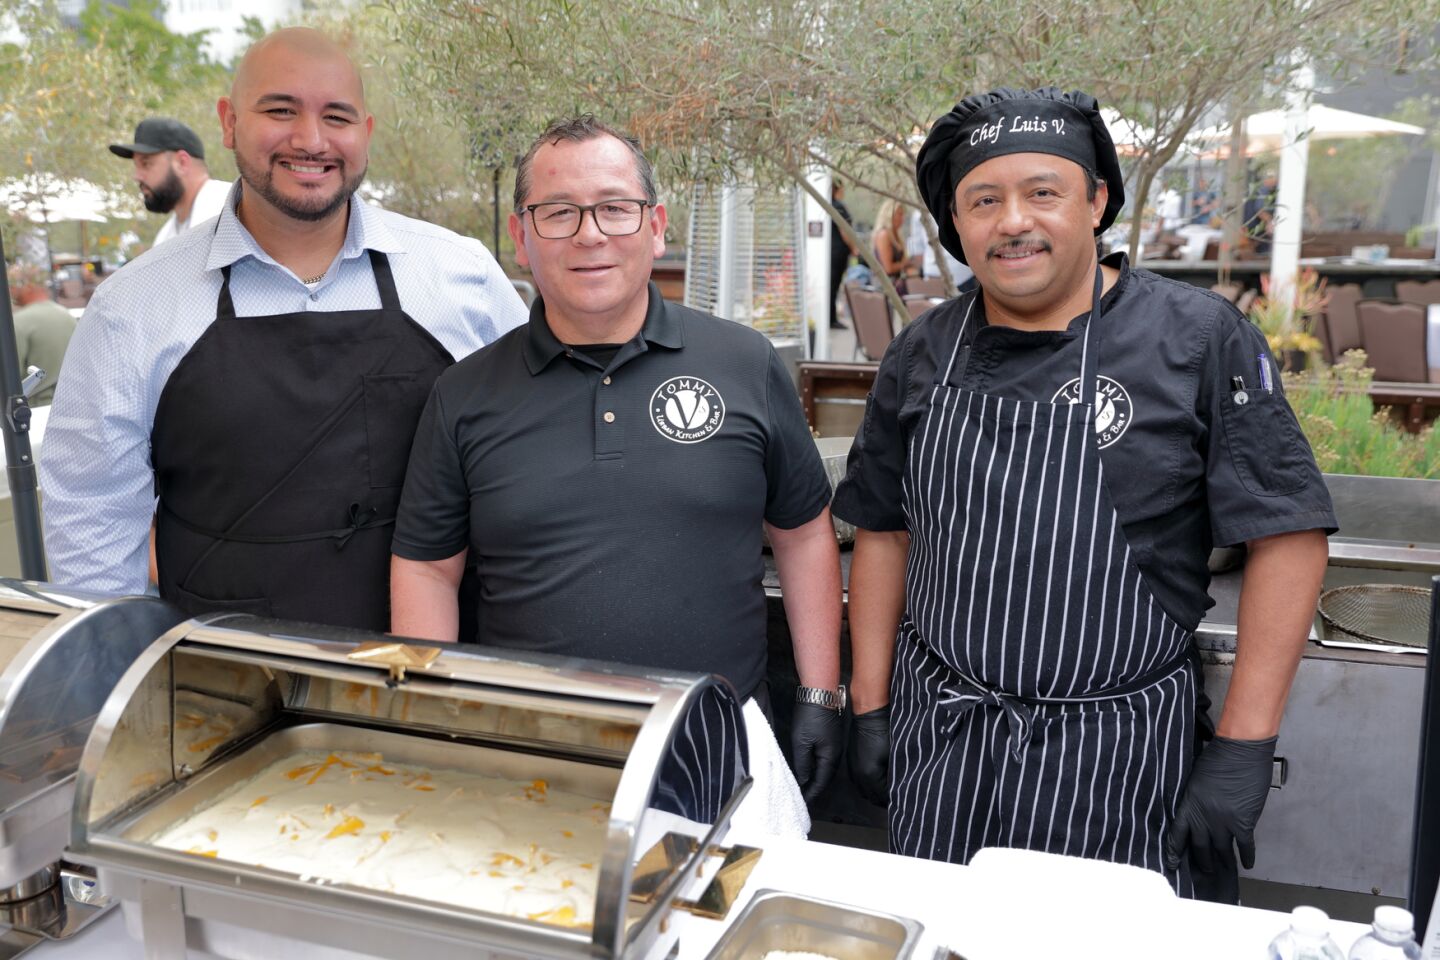 Aaron, Francisco, and Chef Luis from Tommy's Urban Kitchen & Bar